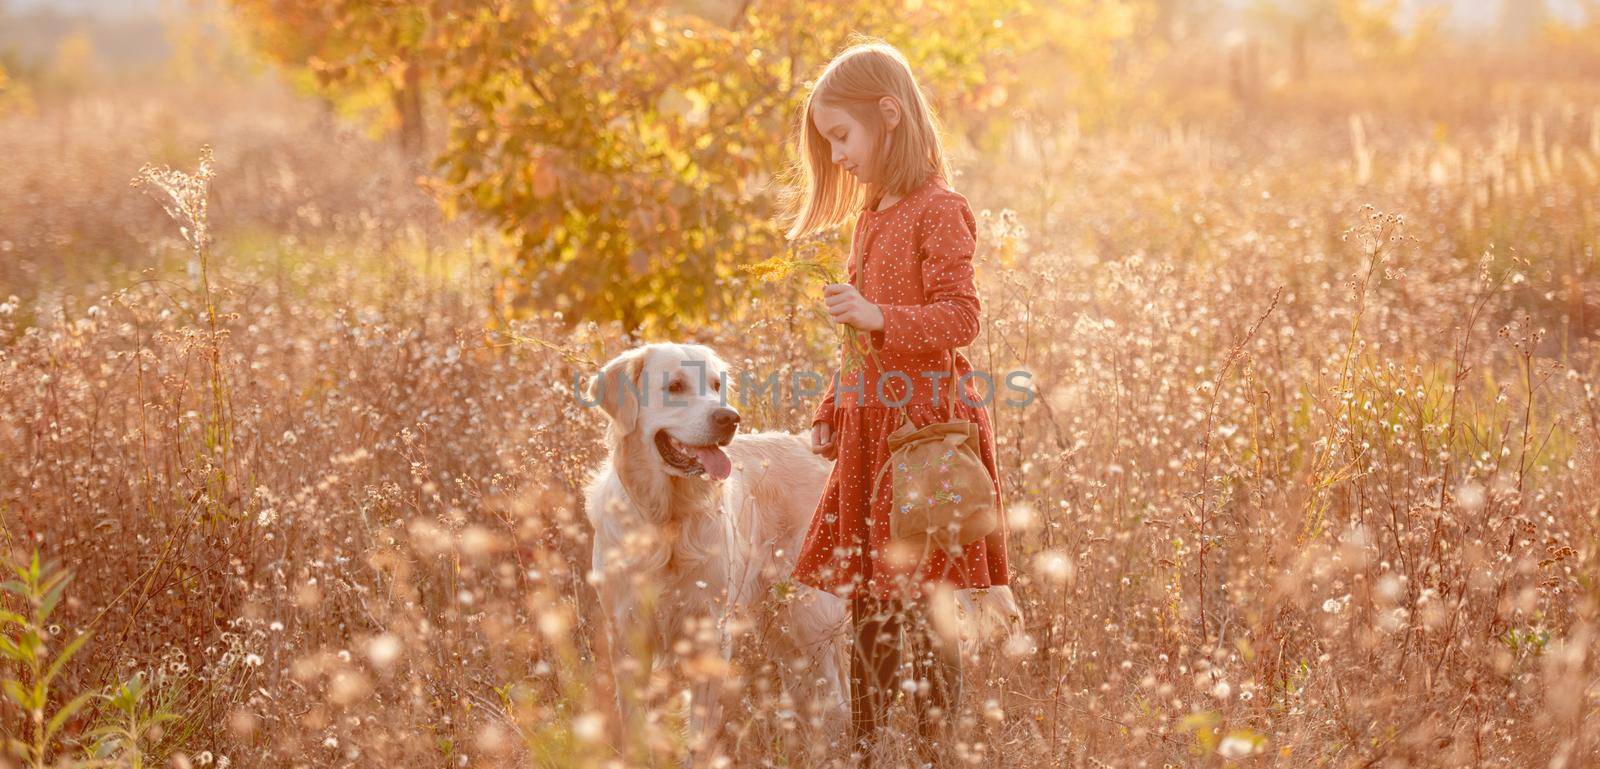 Little girl walking with golden retriever dog in autumn nature